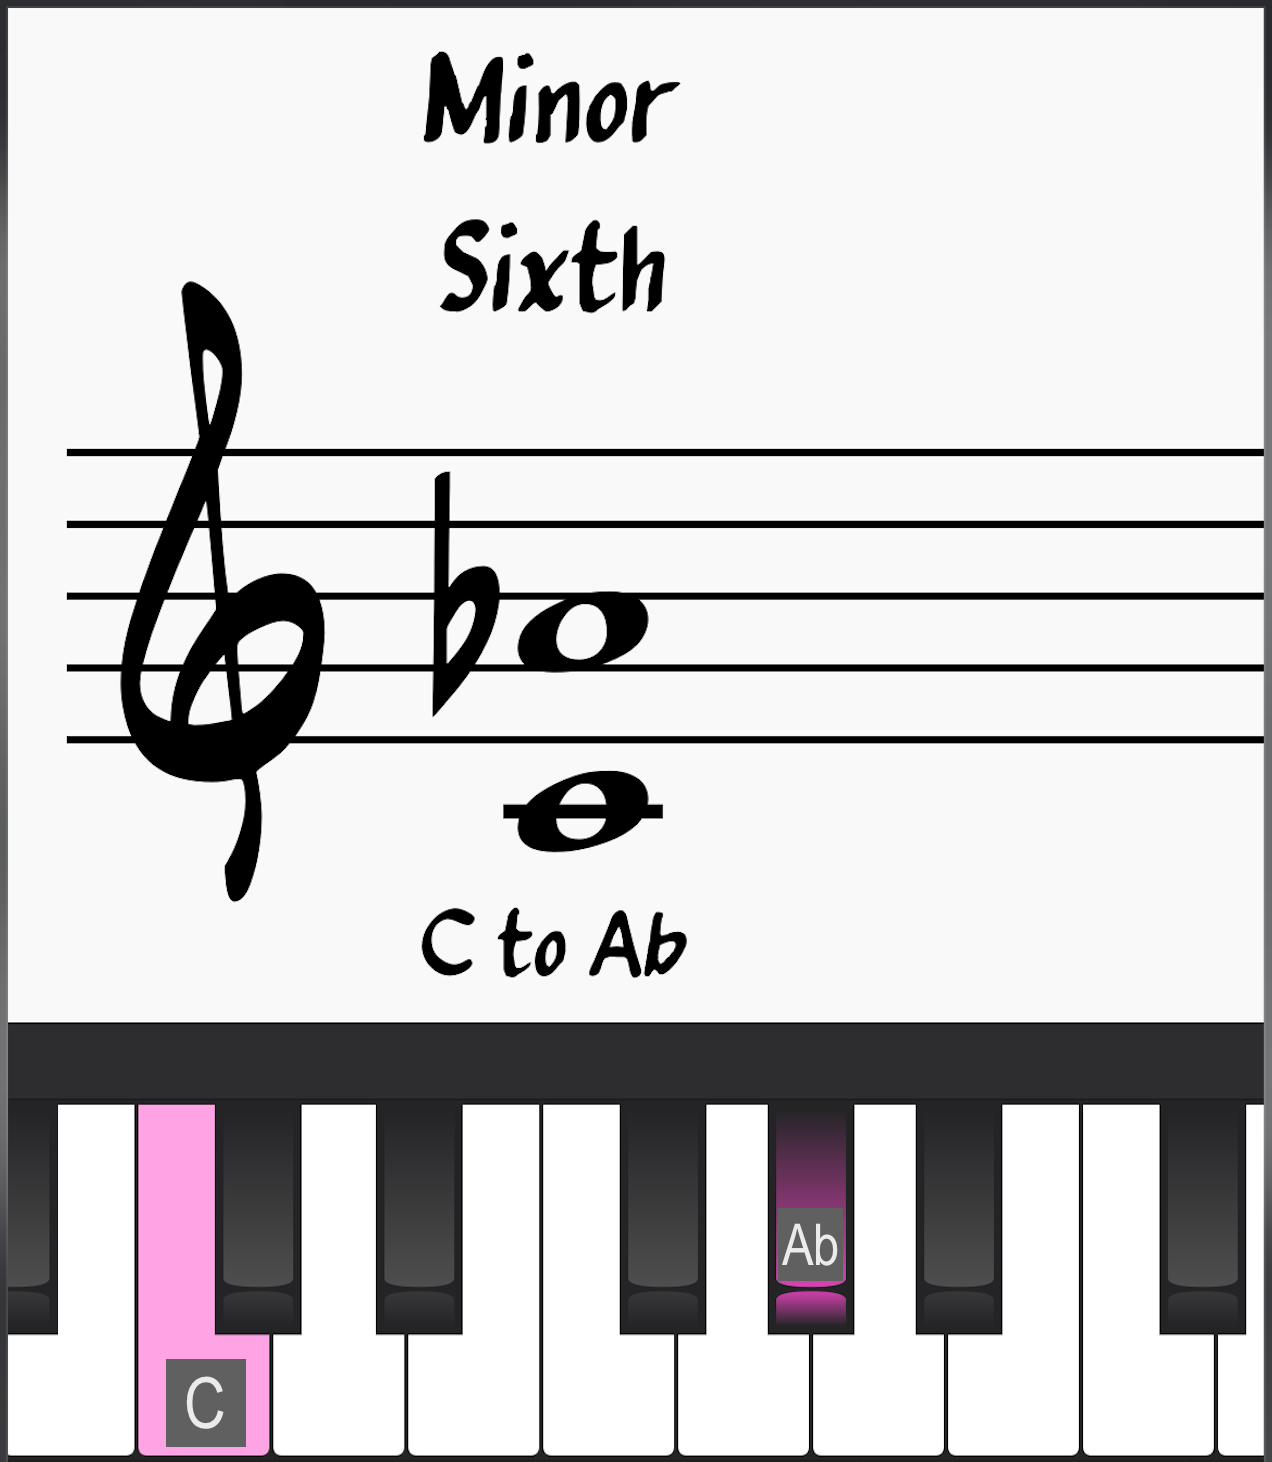 Minor Intervals: Minor sixth; Lower note C to upper note Ab